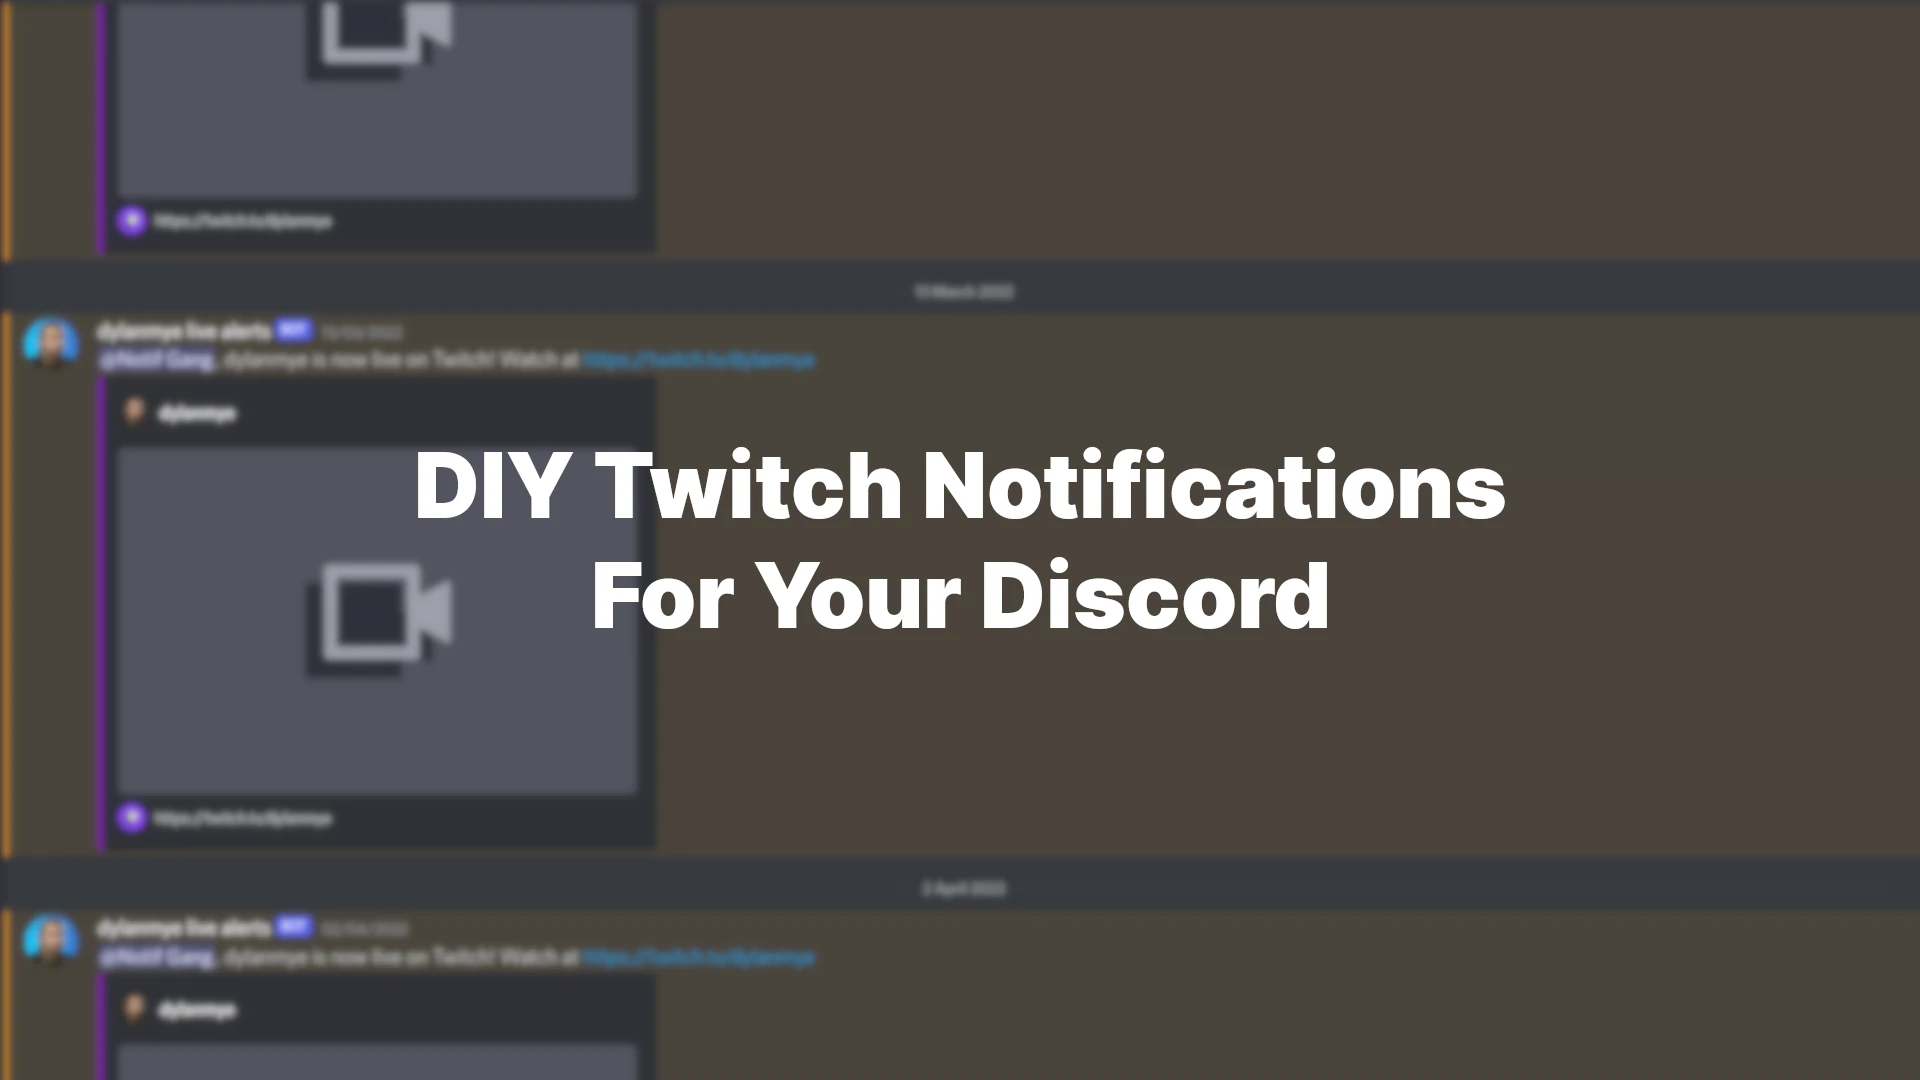 Notify your Discord server when you go live on Twitch with AWS Lambda